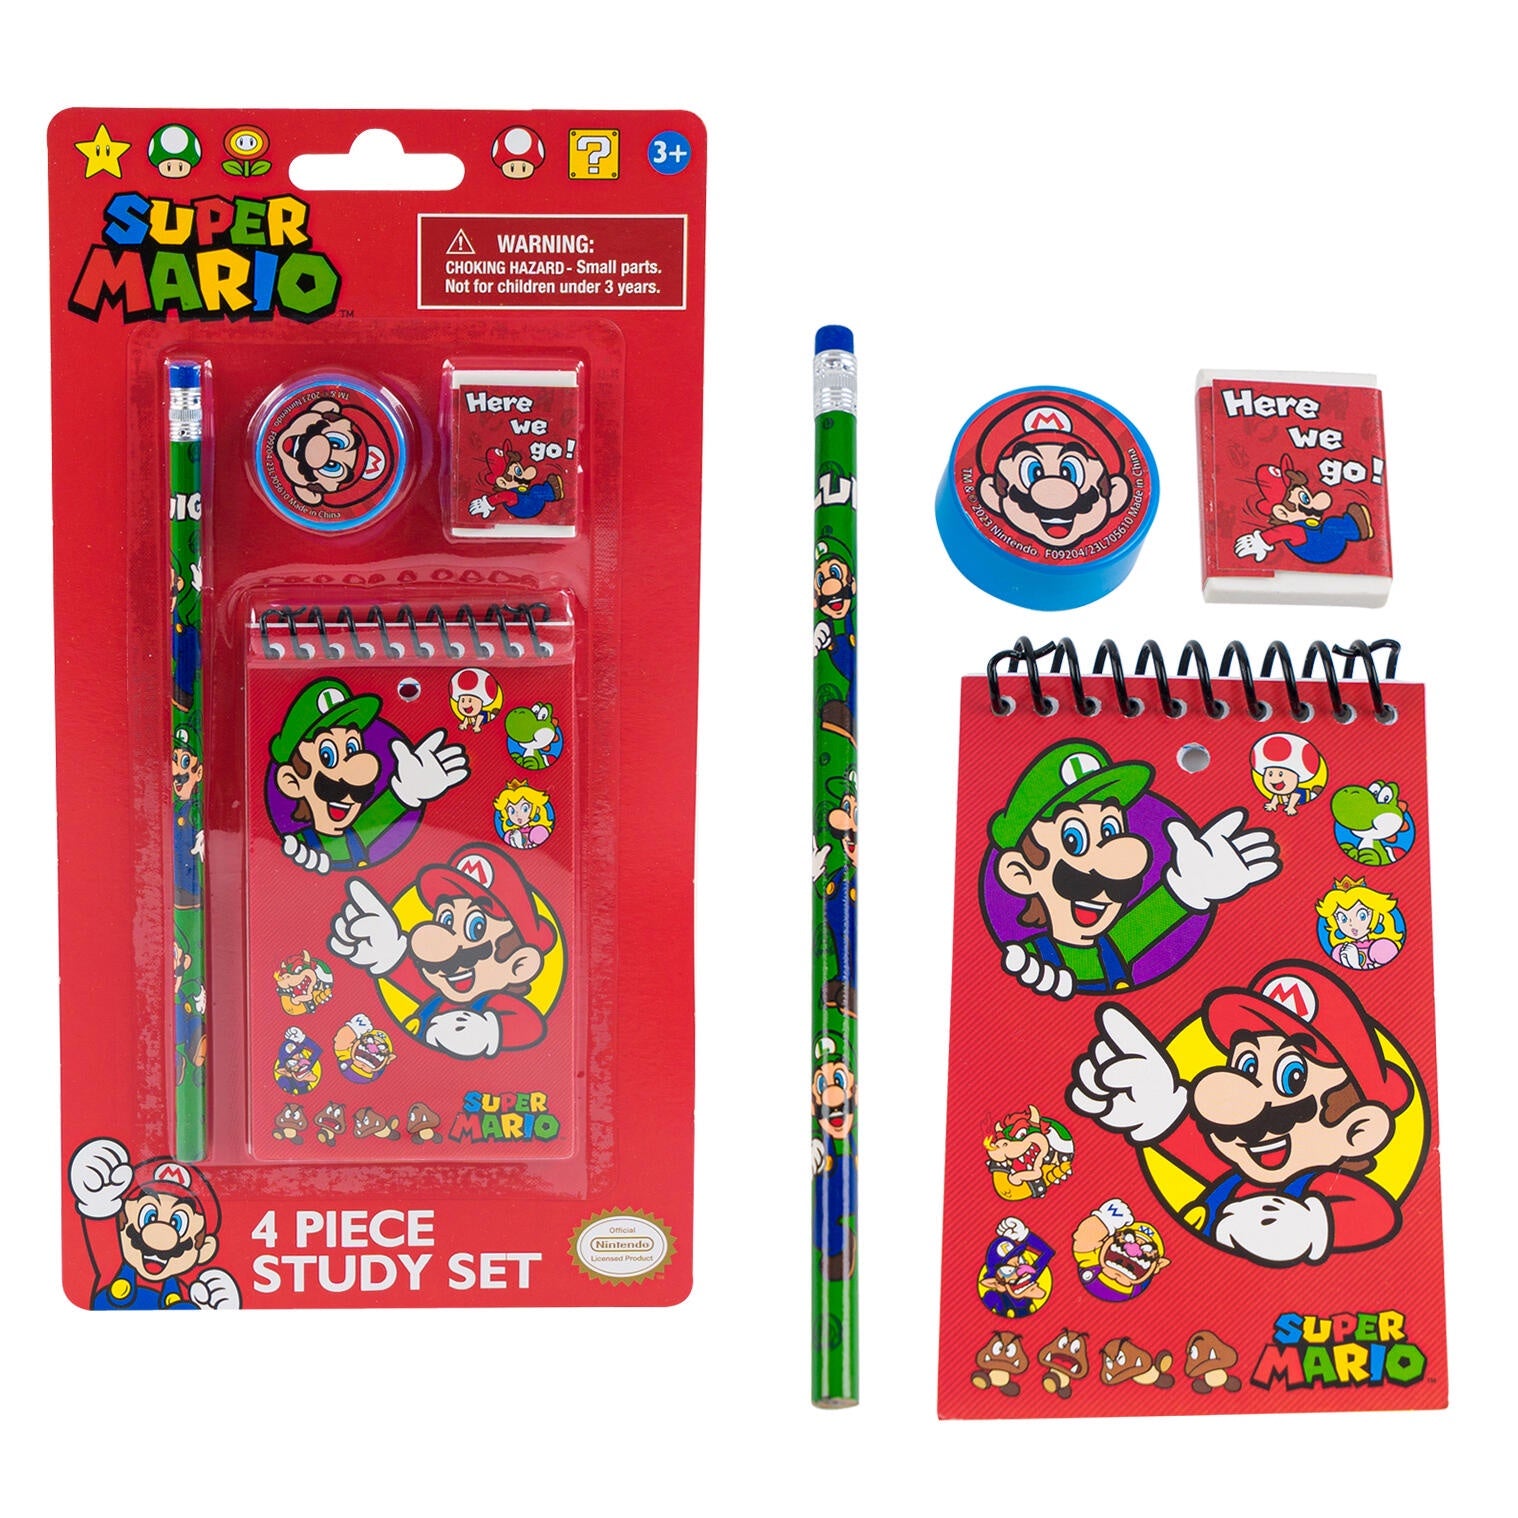  Nintendo Super Mario Sketchbook Set for Kids, Toddlers ~ 3 Pc  Bundle With Mario Coloring Journal, Stickers, and More (Mario Drawing Pad  Activity Kit) : Toys & Games